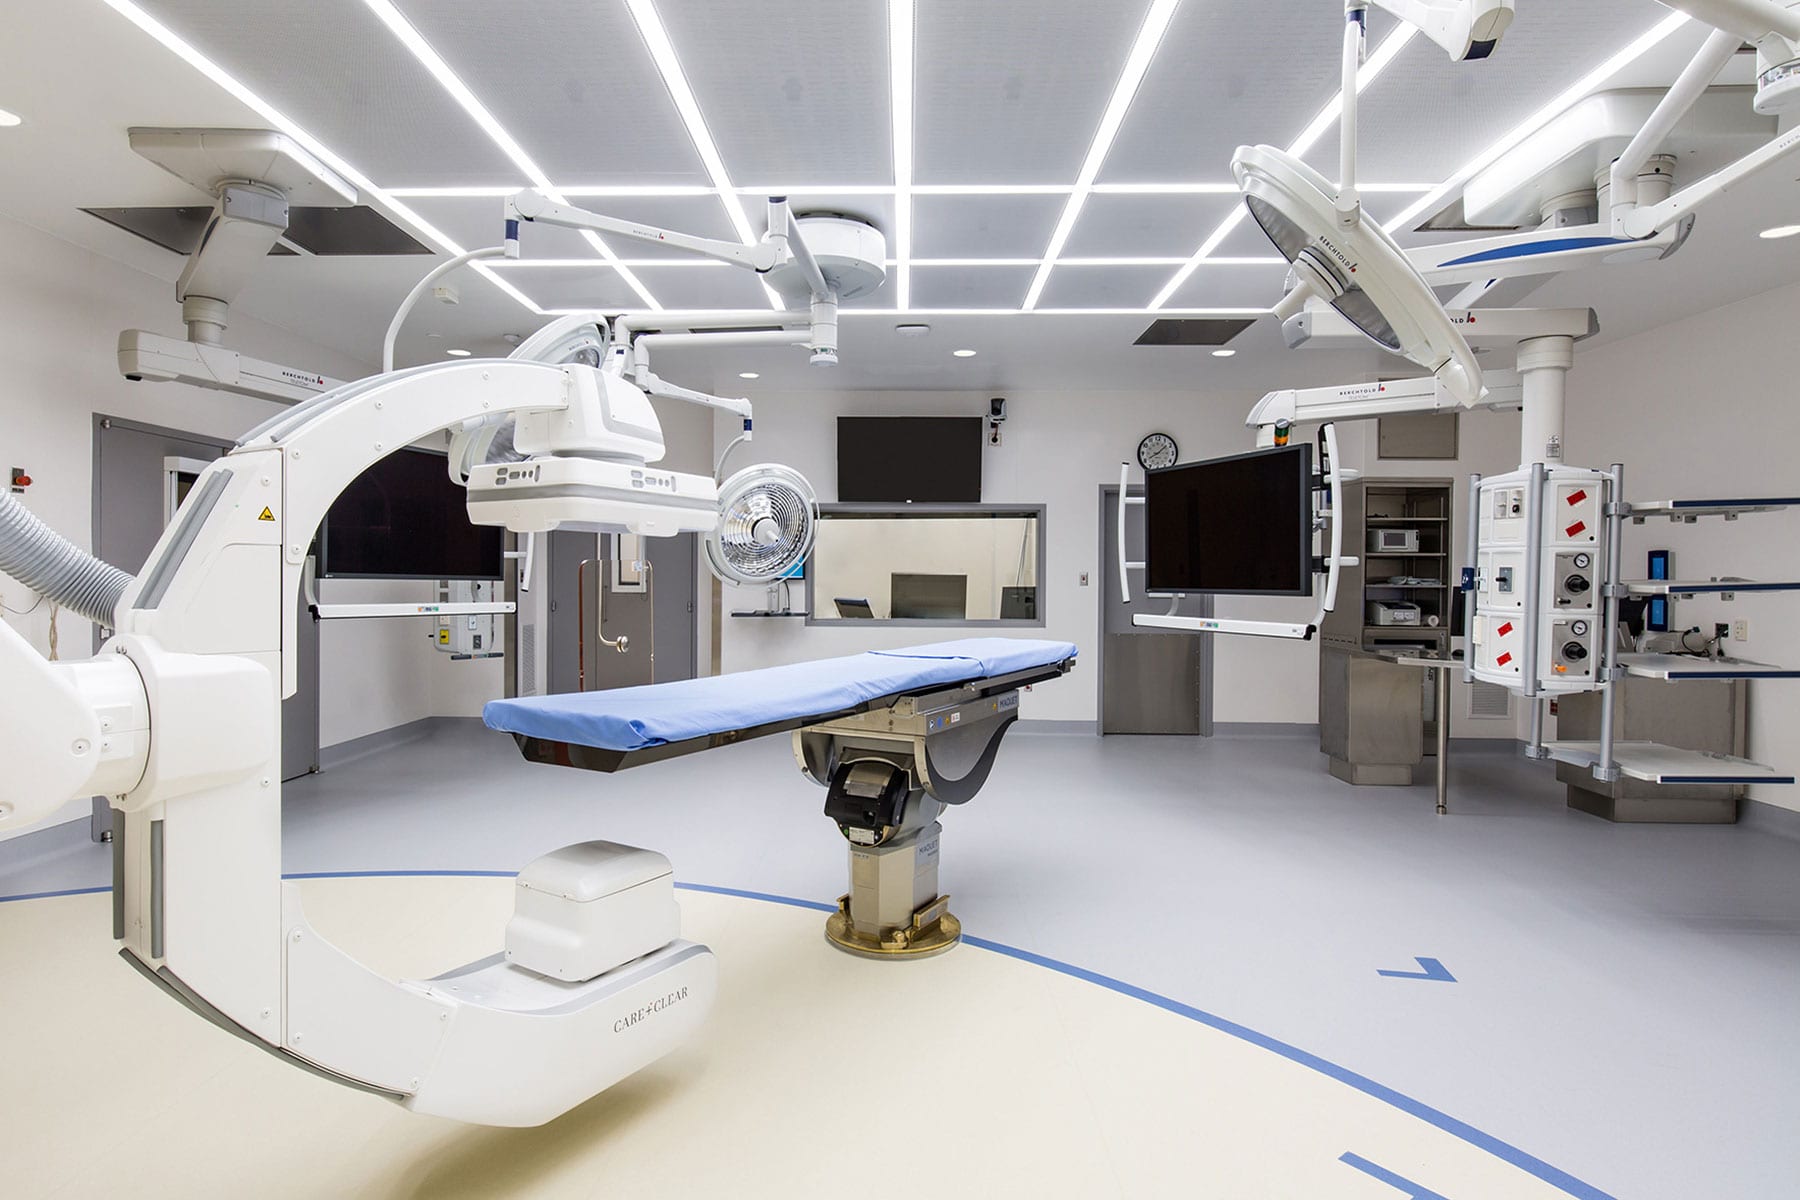 VGH Hybrid operating room with radiological imaging equipment and booms